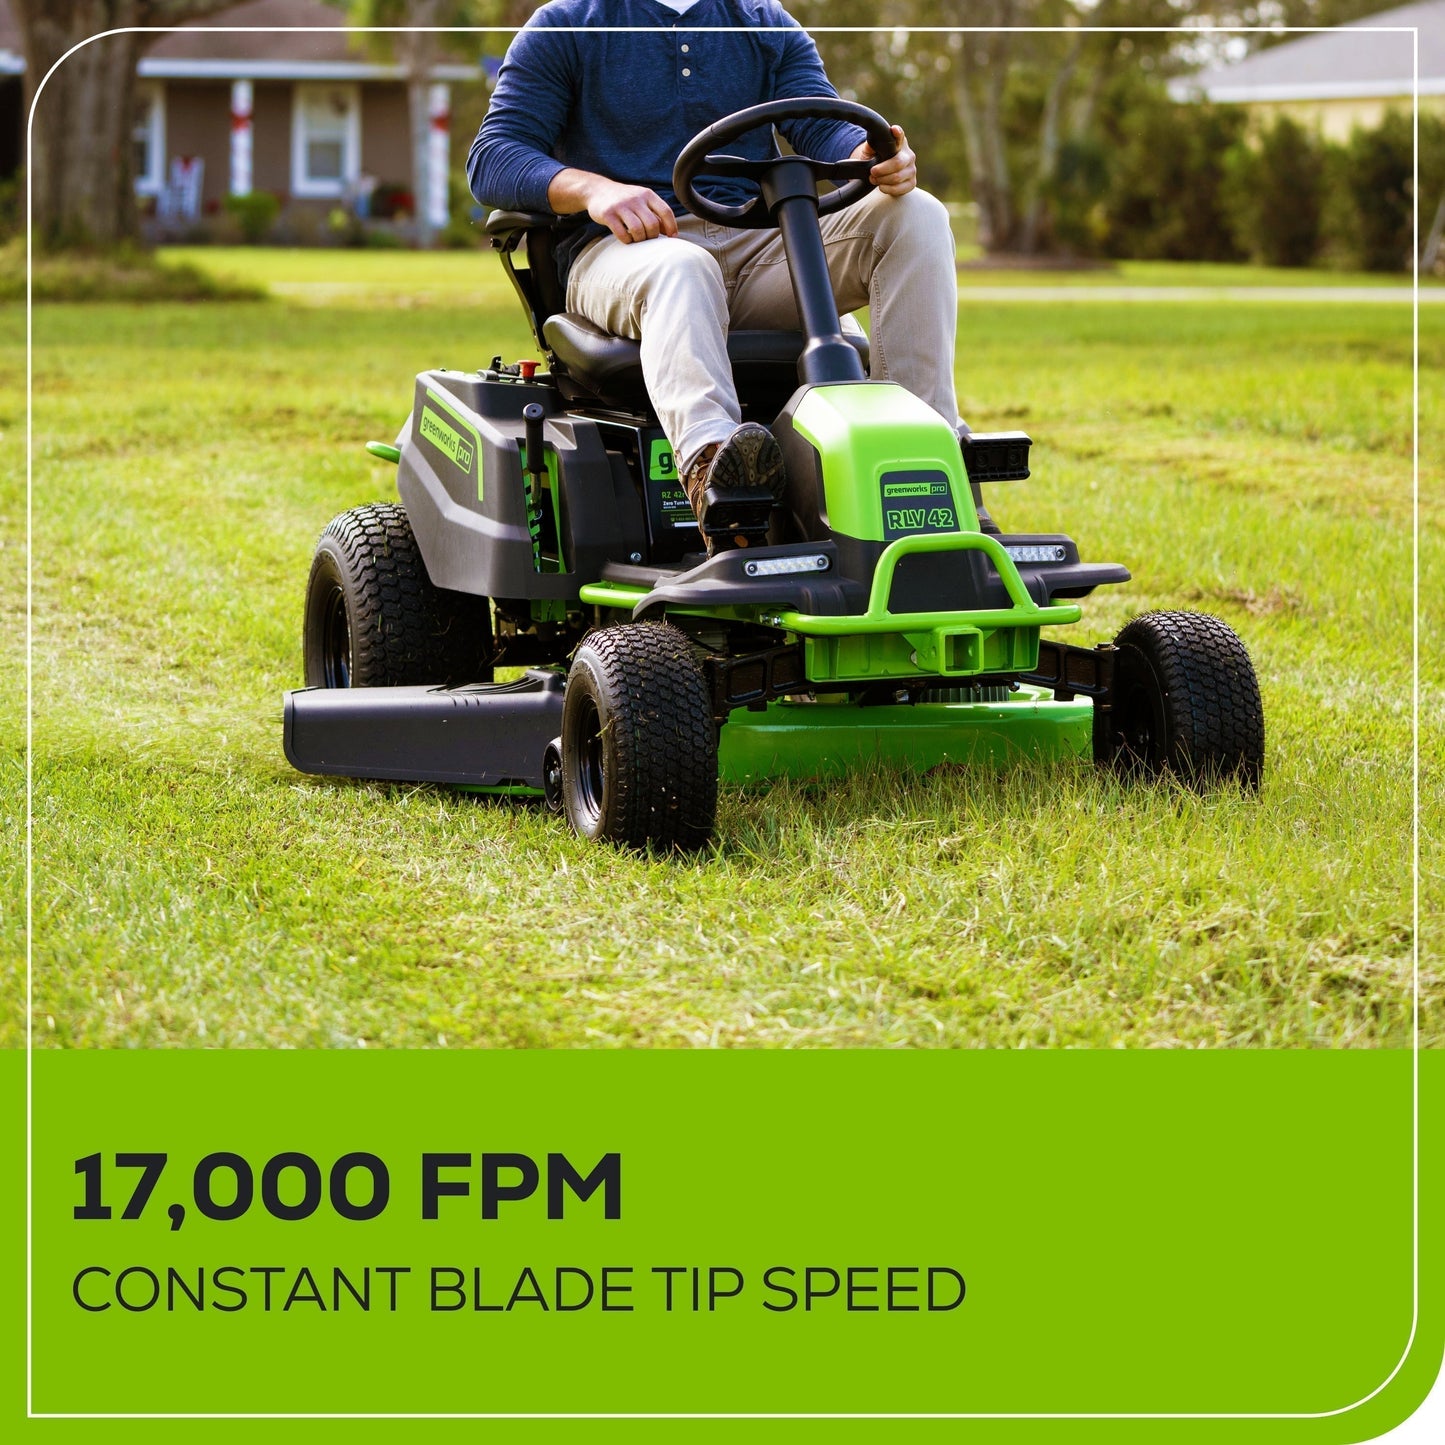 60V 42" Cordless Battery CrossoverT Riding Lawn Mower w/ Four (4) 8.0Ah Batteries and Two (2) Dual Port Turbo Chargers - ZEROTURNN